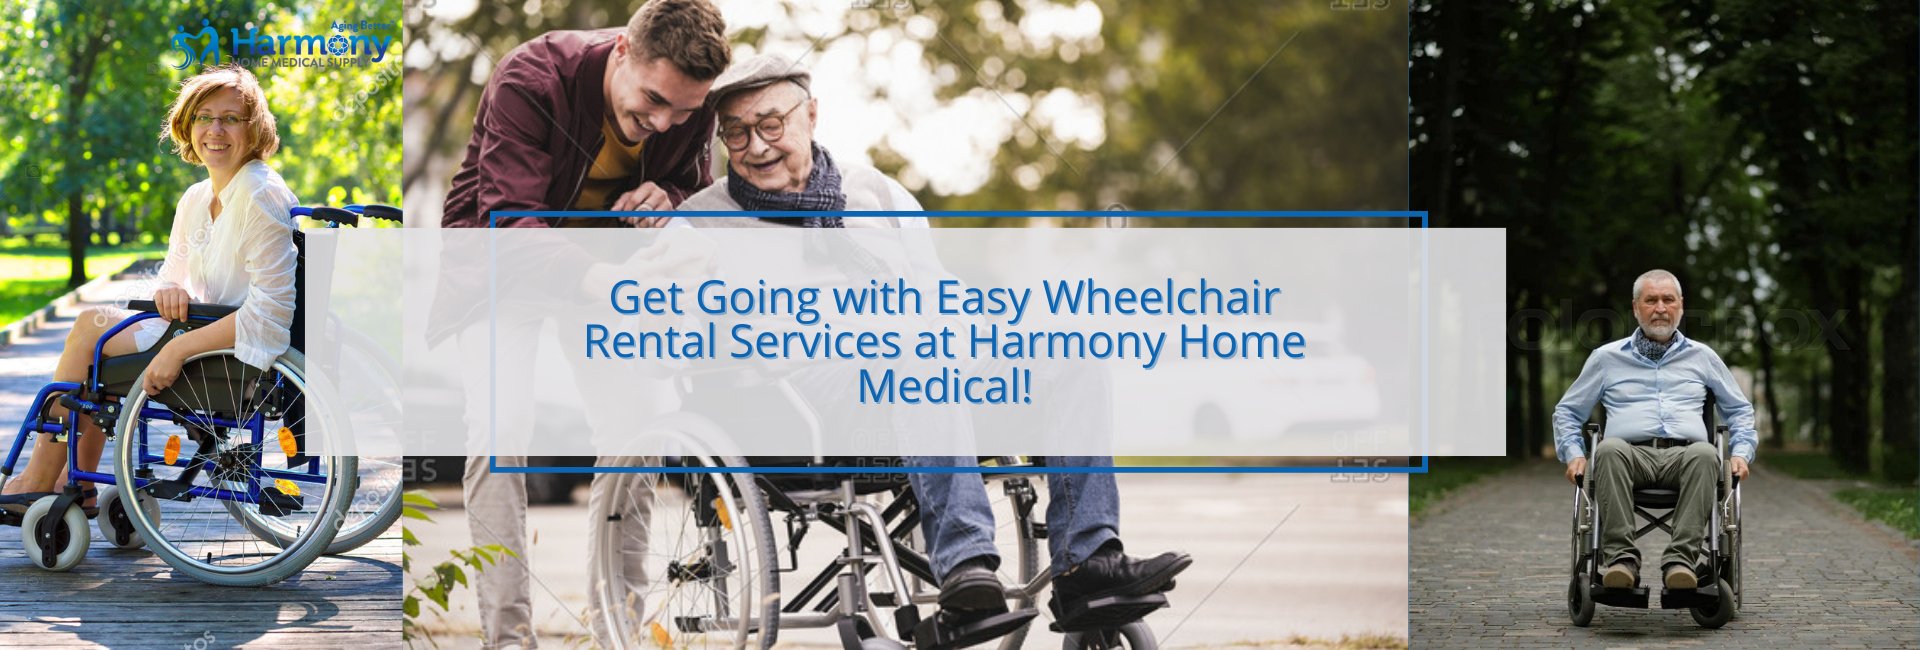 Get Going with Easy Wheelchair Rental Services at    Harmony Home Medical!